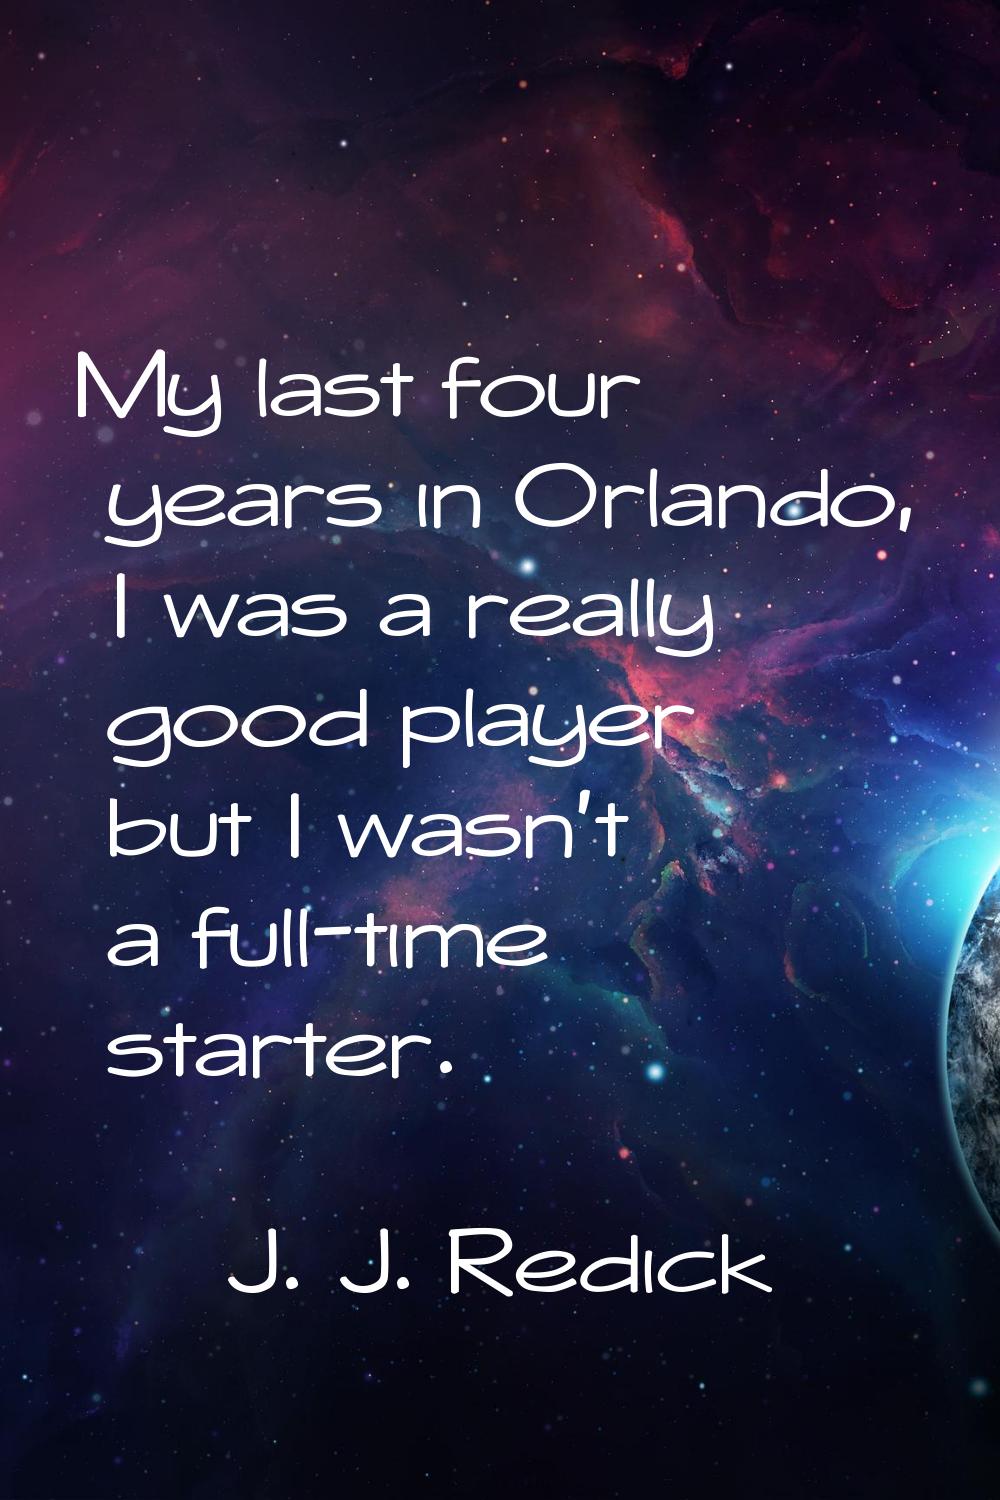 My last four years in Orlando, I was a really good player but I wasn't a full-time starter.